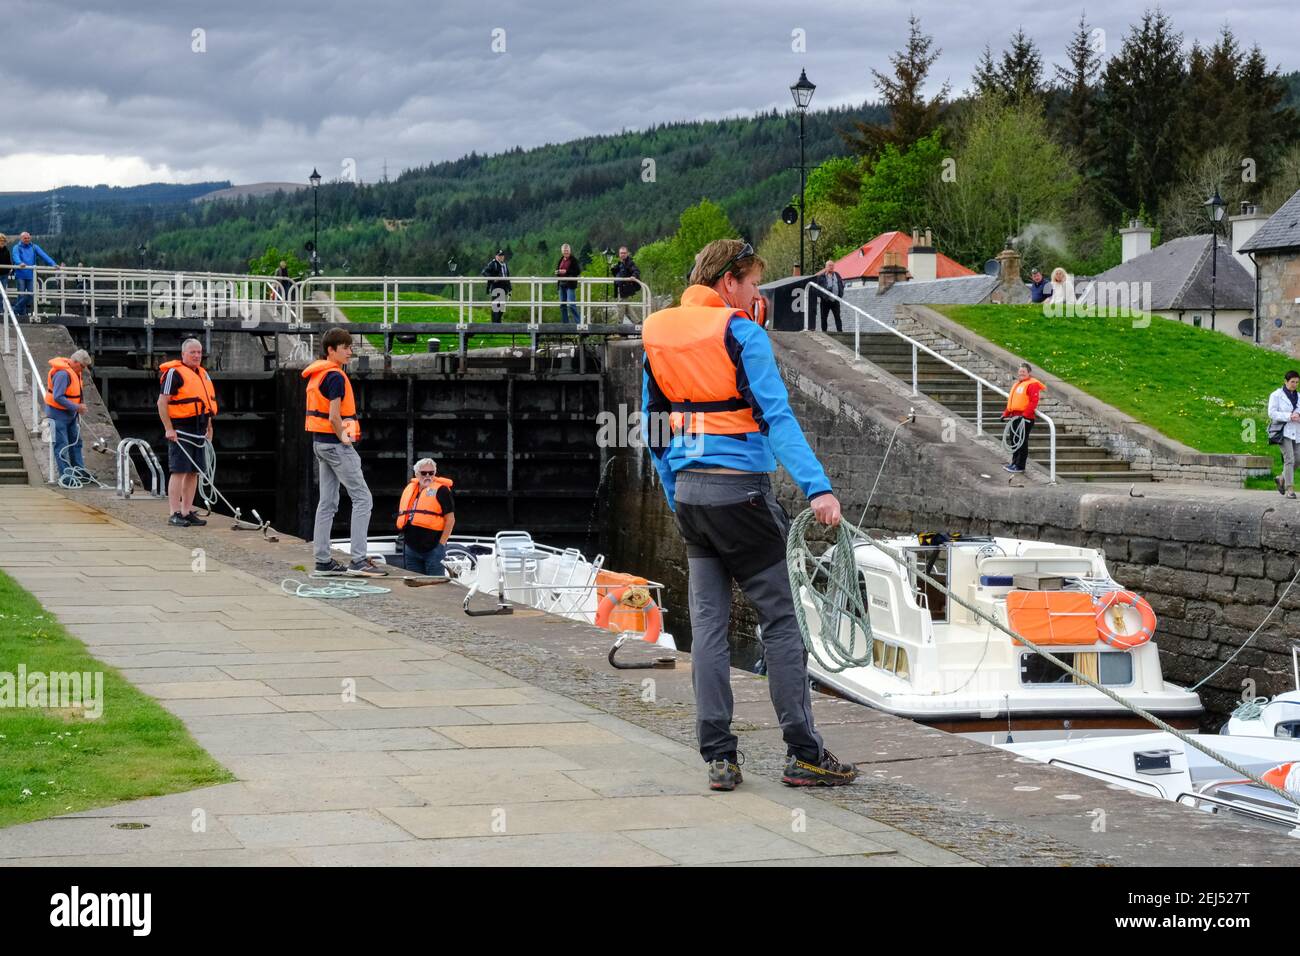 Boats making there way though the Lochs on the Caledonian Canal at Fort Augustu in Scotland, UK. Stock Photo